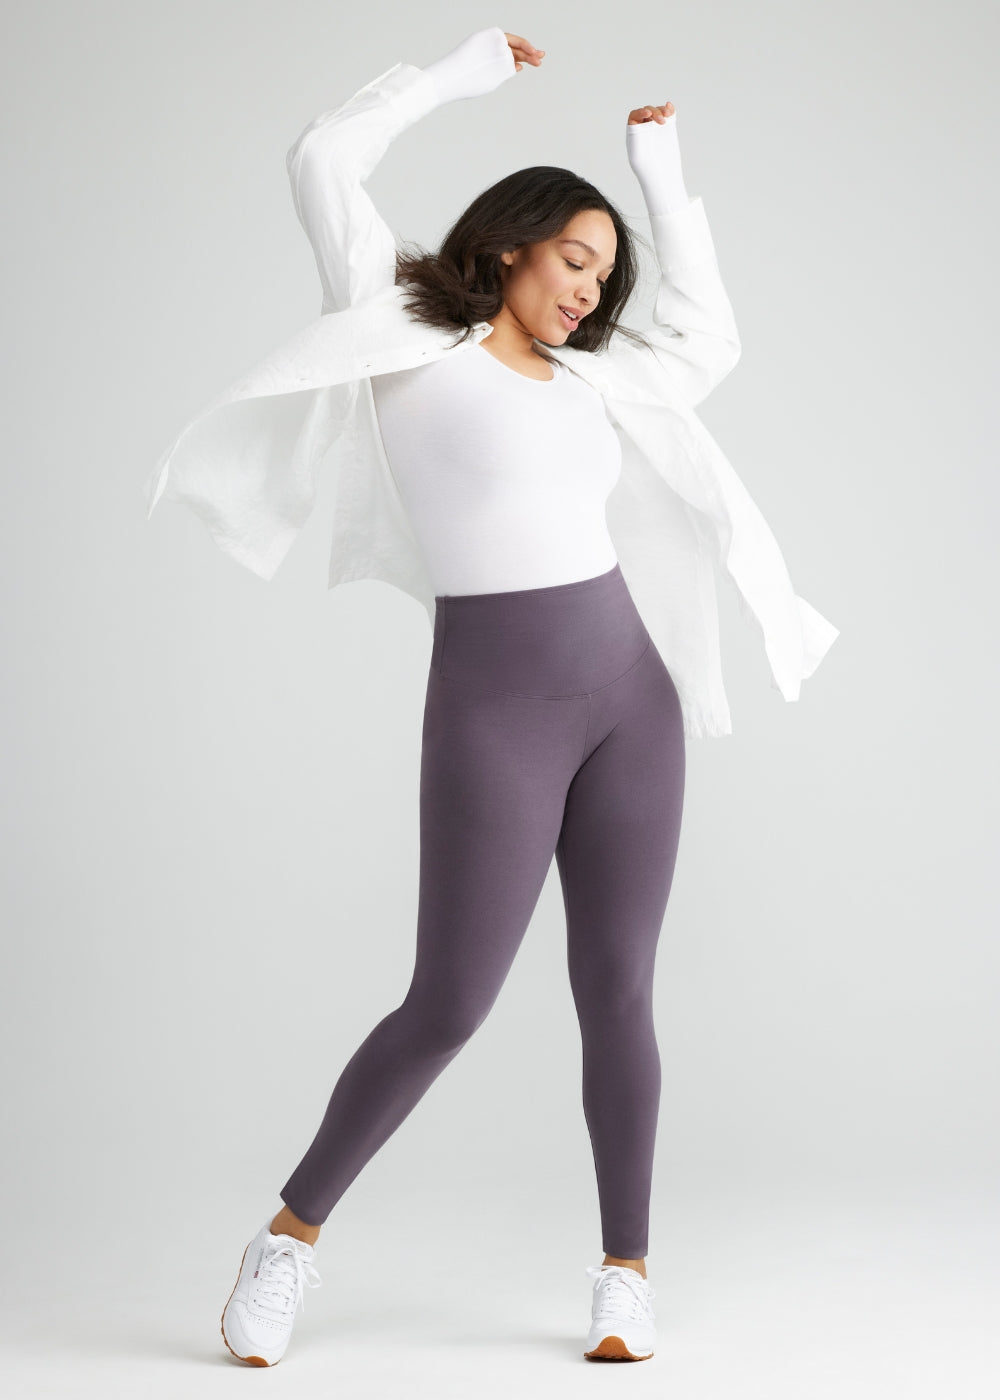 Seamless Solutions - High Waist Shaping Short w/ Rear Shaping